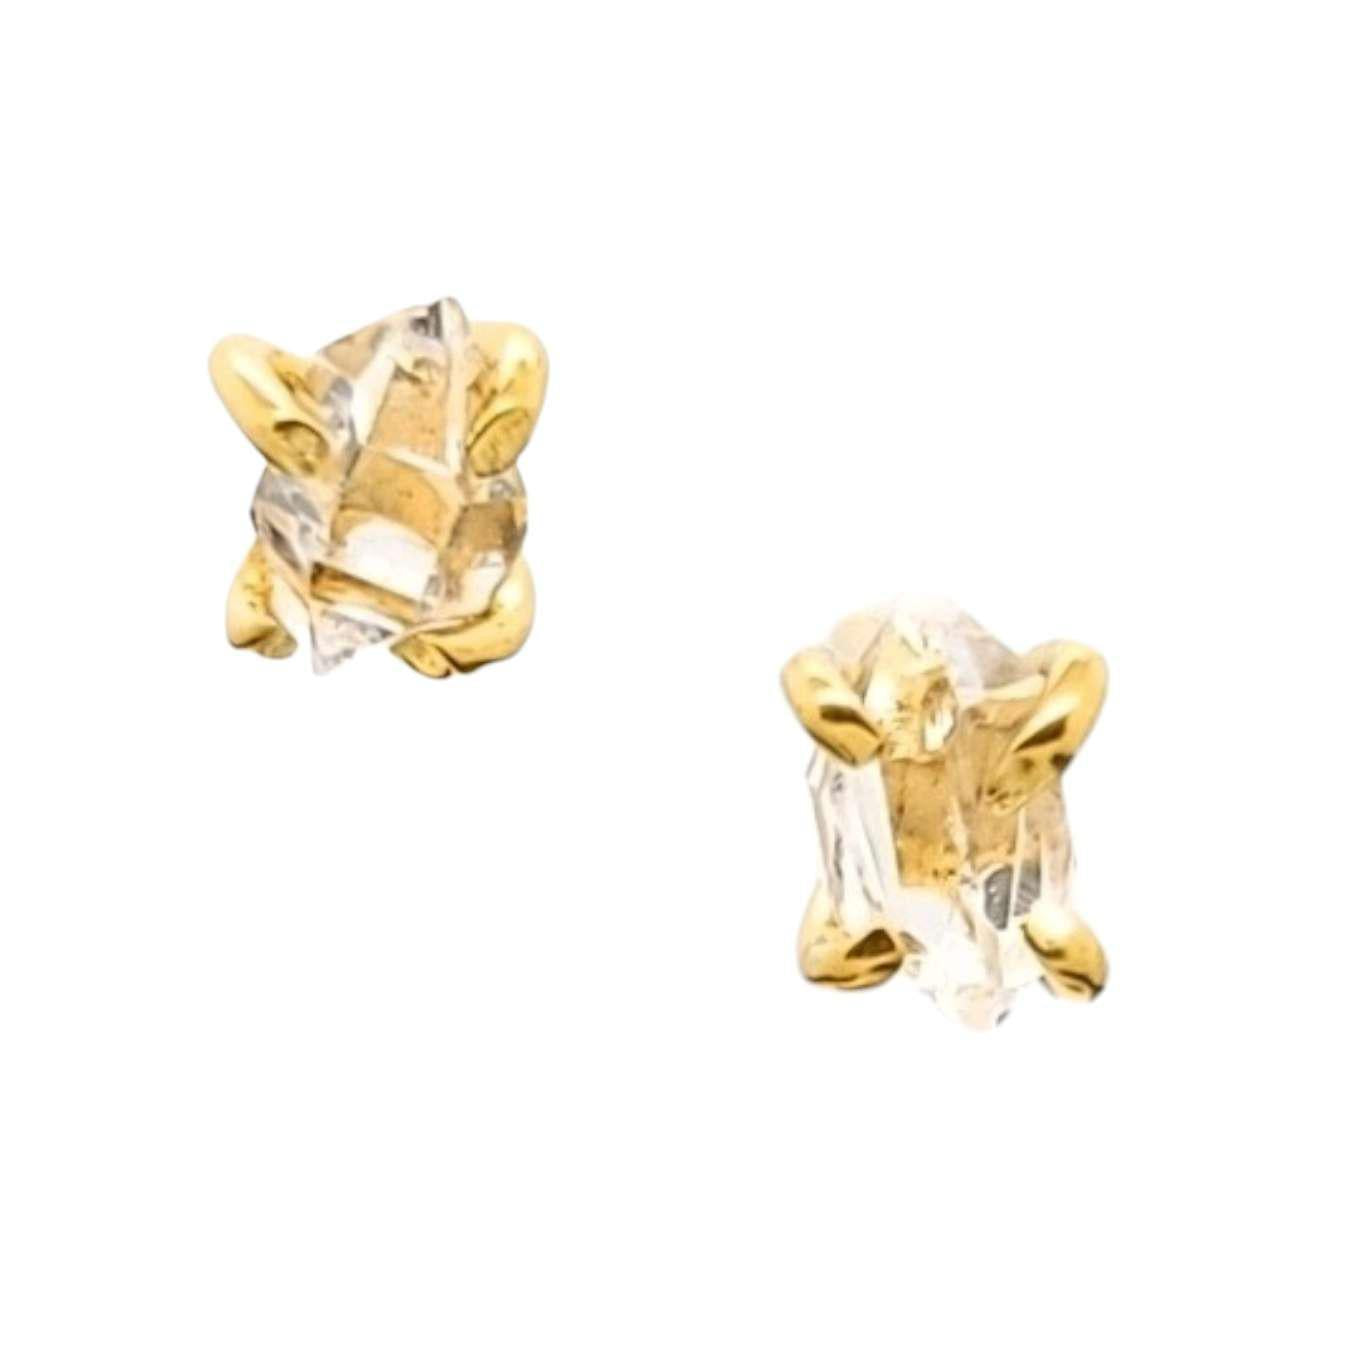 Earrings - Classic 5-6mm Herkimer Studs in Yellow Gold Vermeil by Stórica Studio